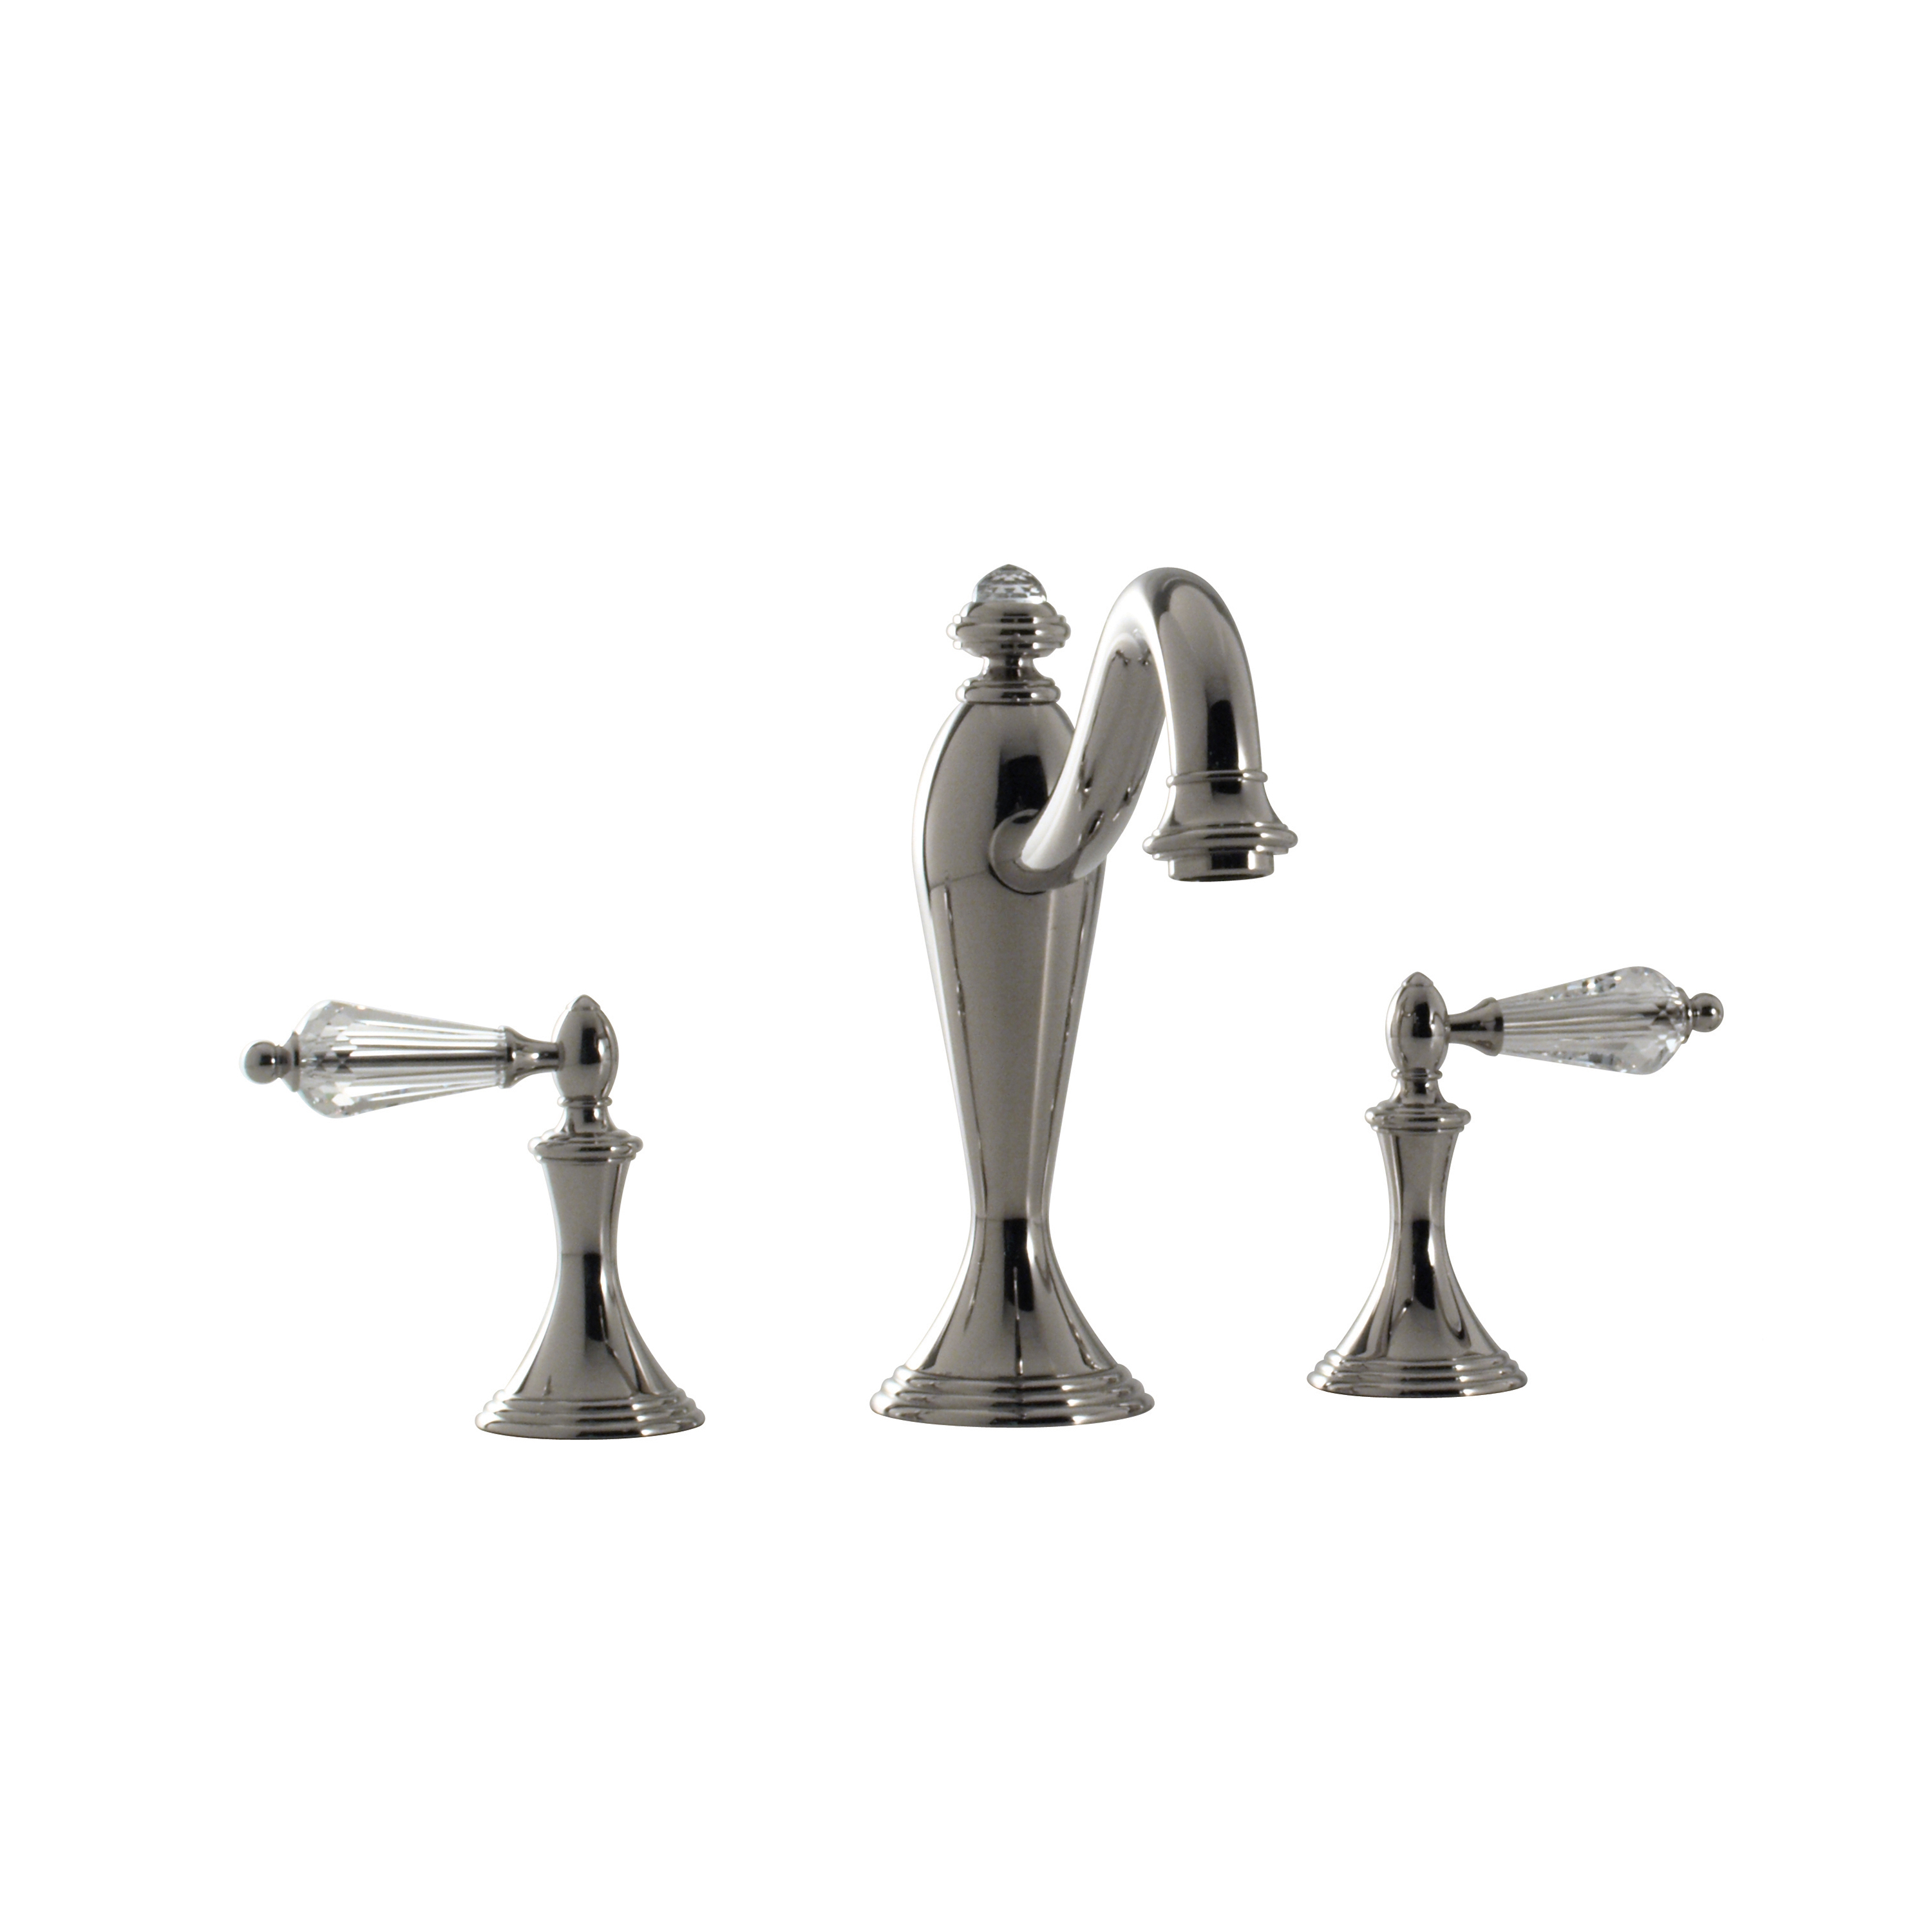 Santec 2550YC10 Lear Crystal Roman Tub Filler Set with "YC" Handles - Polished Chrome - Click Image to Close